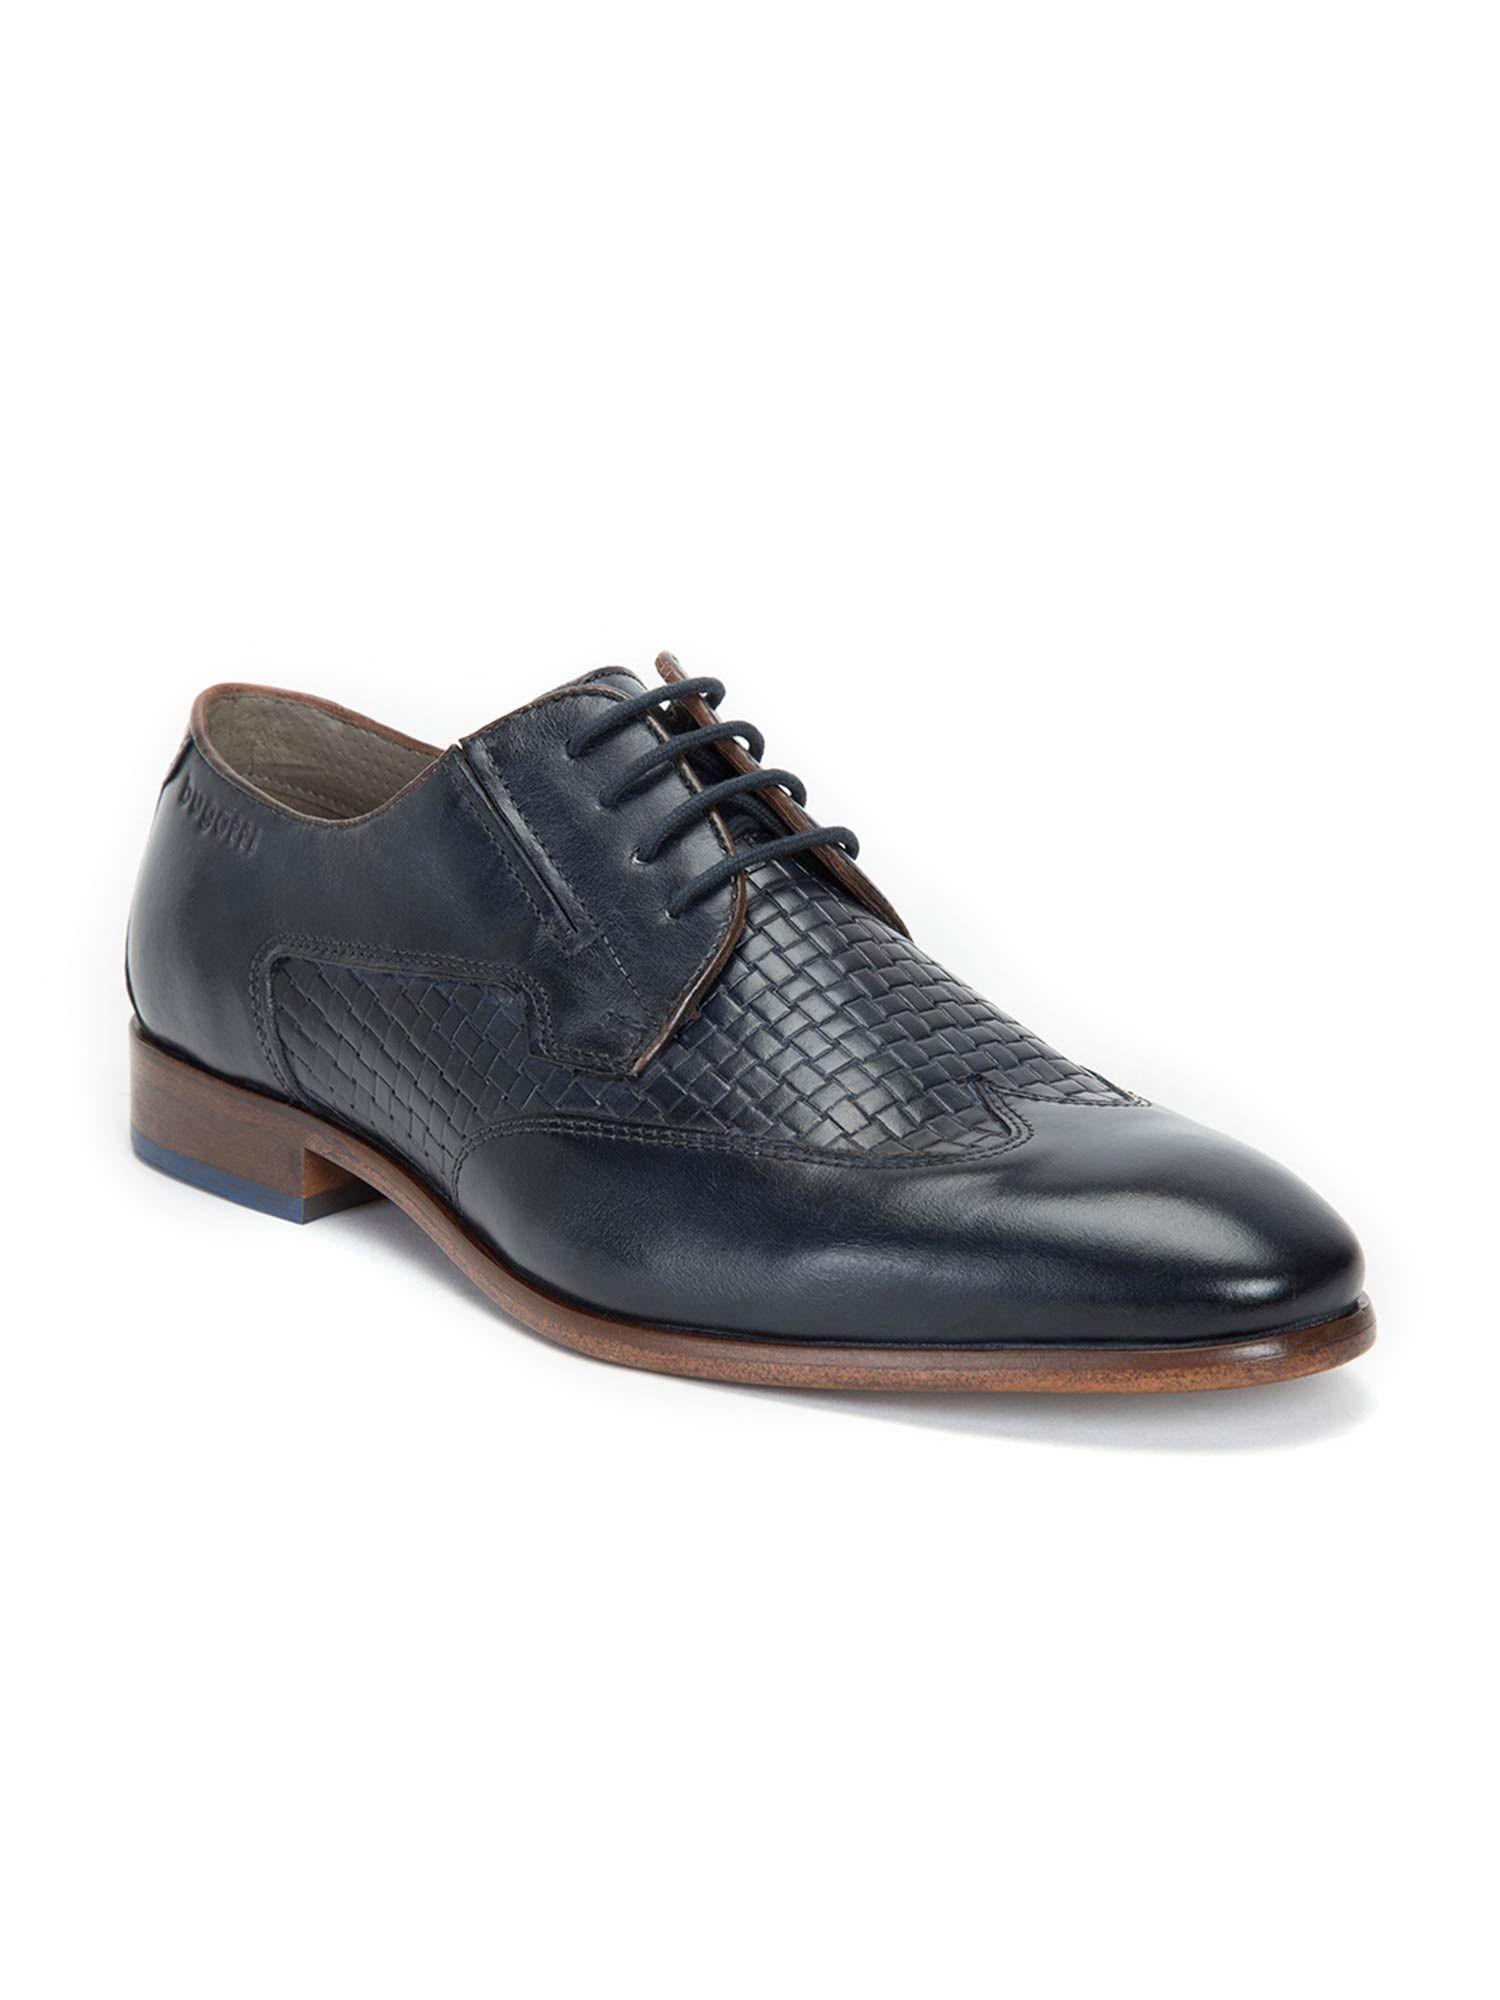 blue patterned brogues